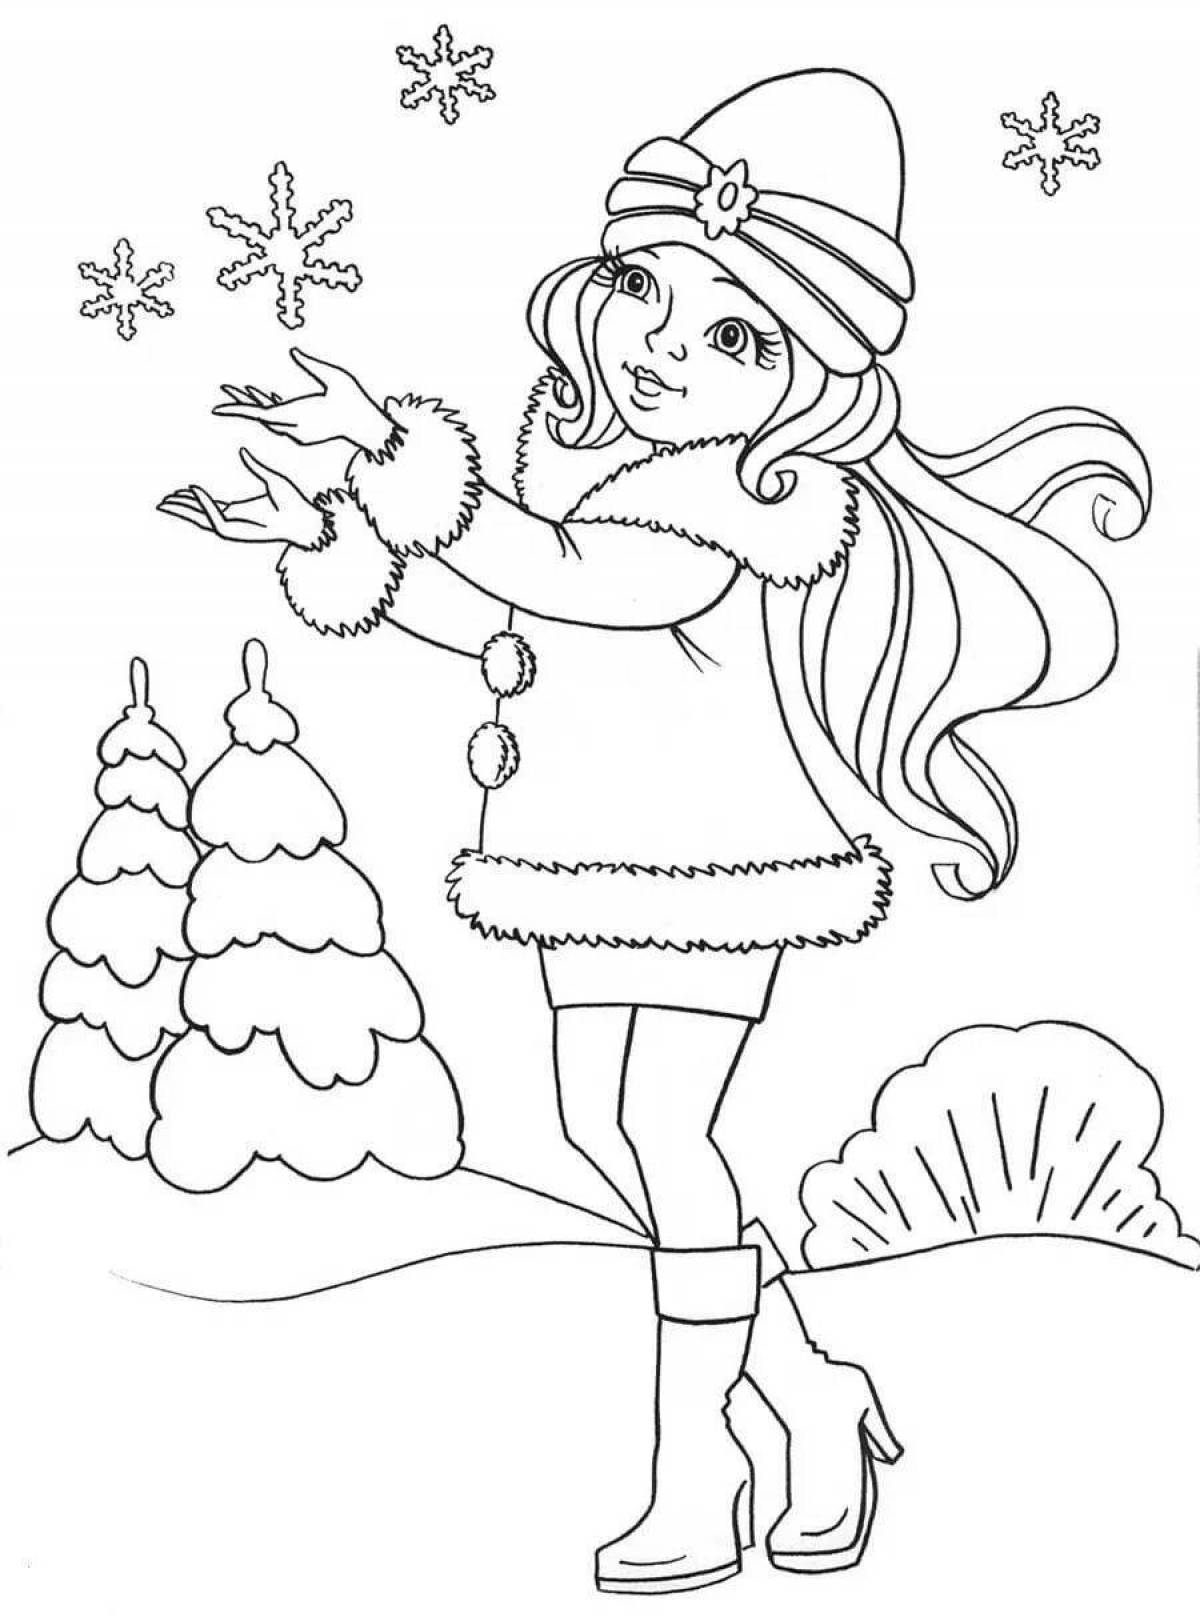 Whimsical Christmas coloring book for 8-9 year olds